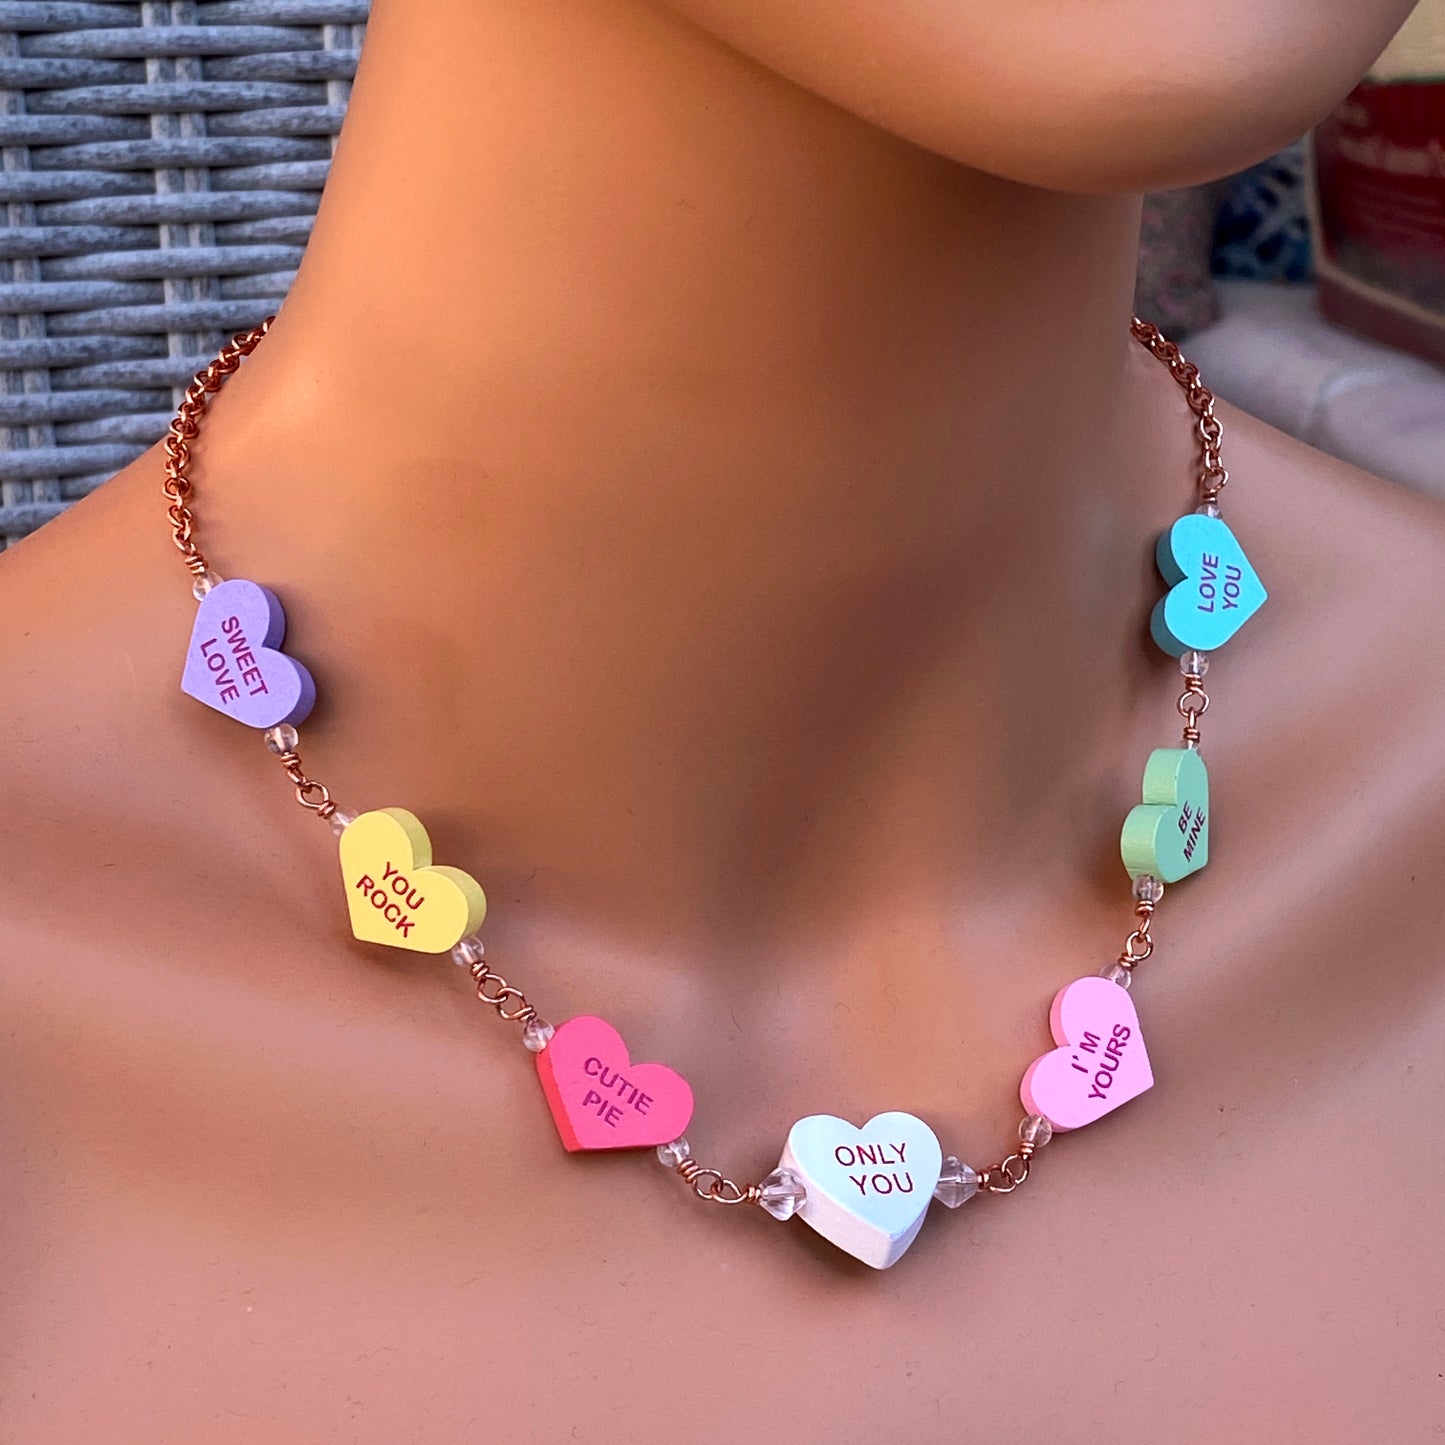 Candy Heart Necklace with Quartz